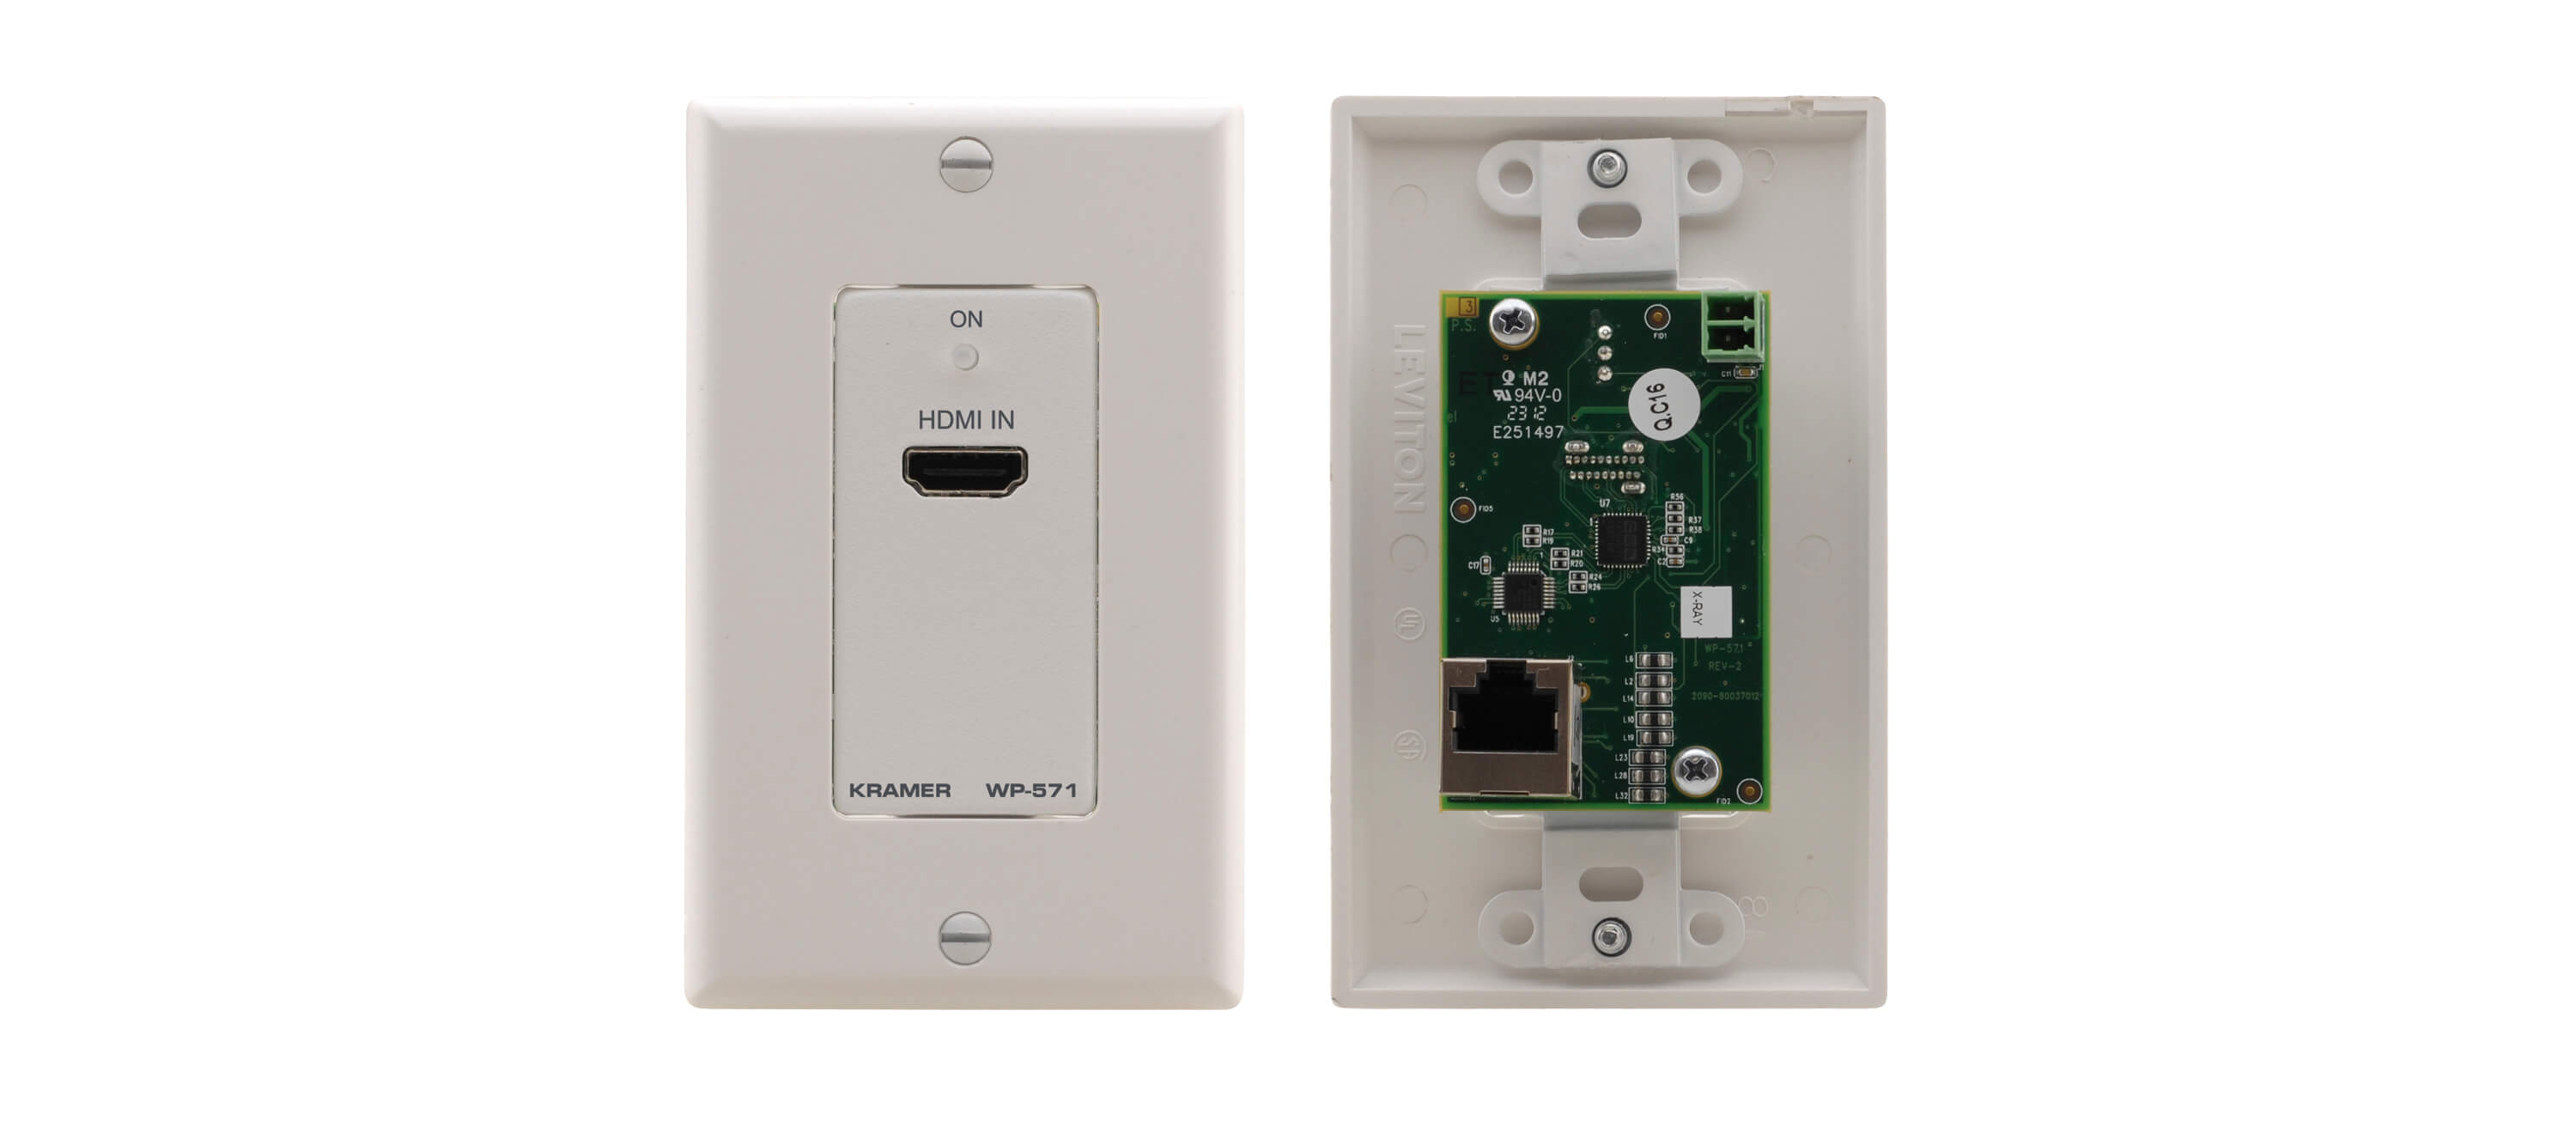 WP-571 HDMI HDCP 2.2 Wall Plate Transmitter over PoC Long–Reach DGKat - White